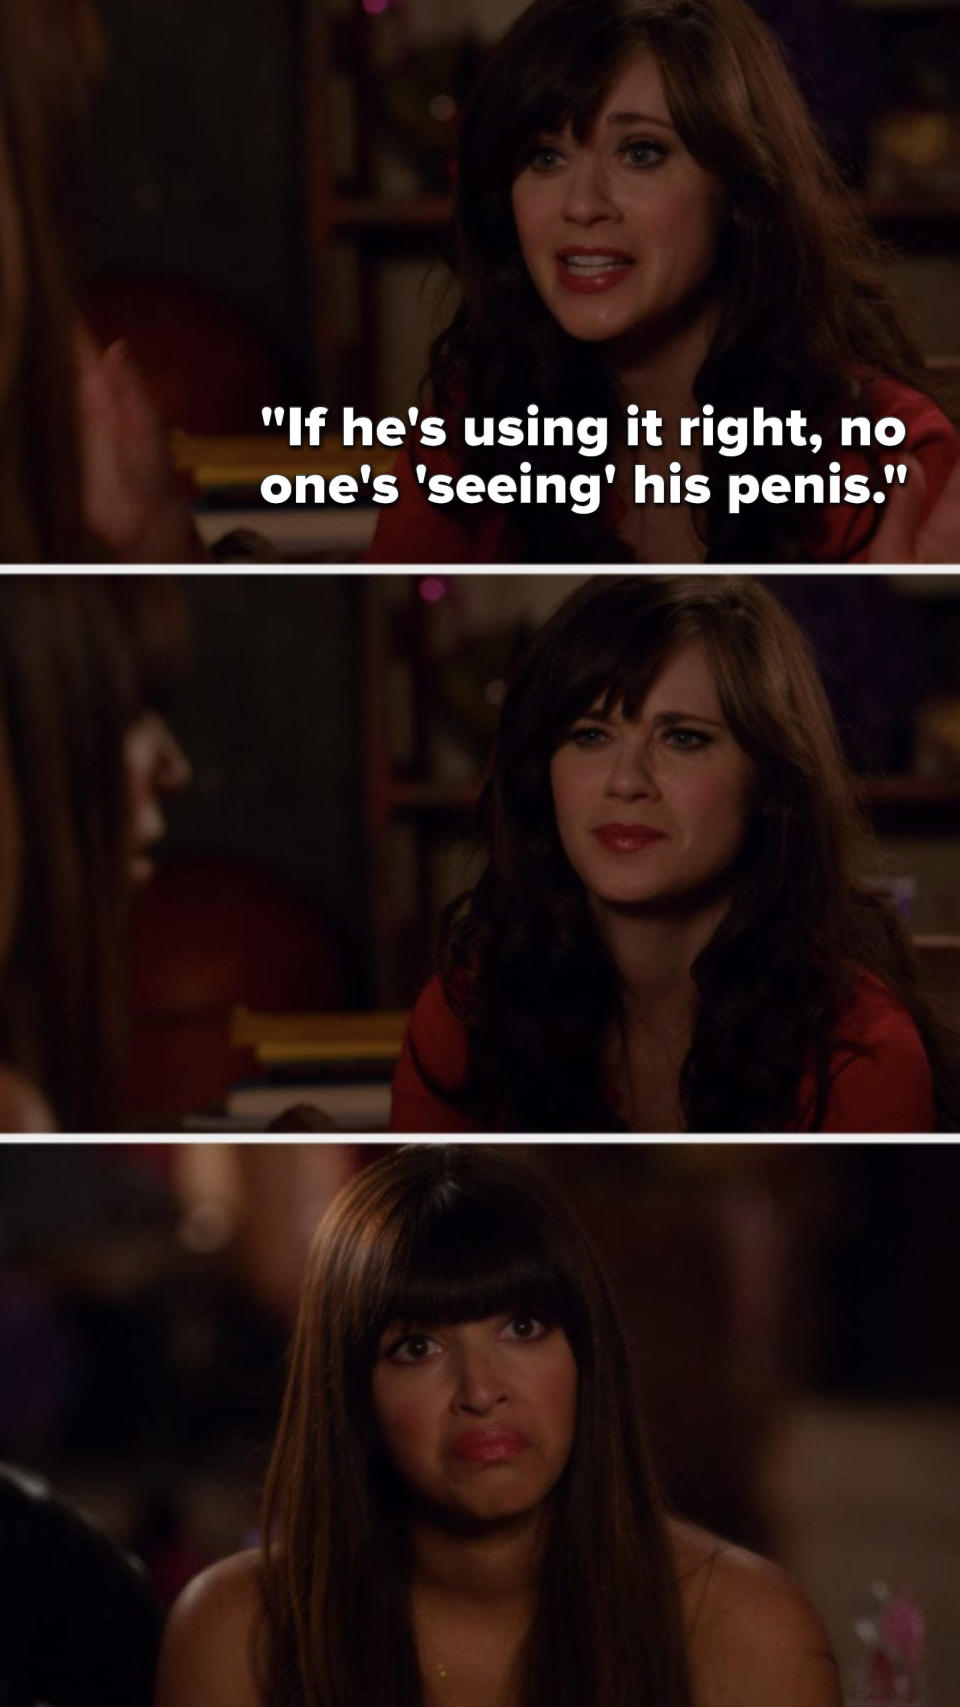 On New Girl, Jess says, If he is using it right, no one is seeing his penis, and Cece contemplates that